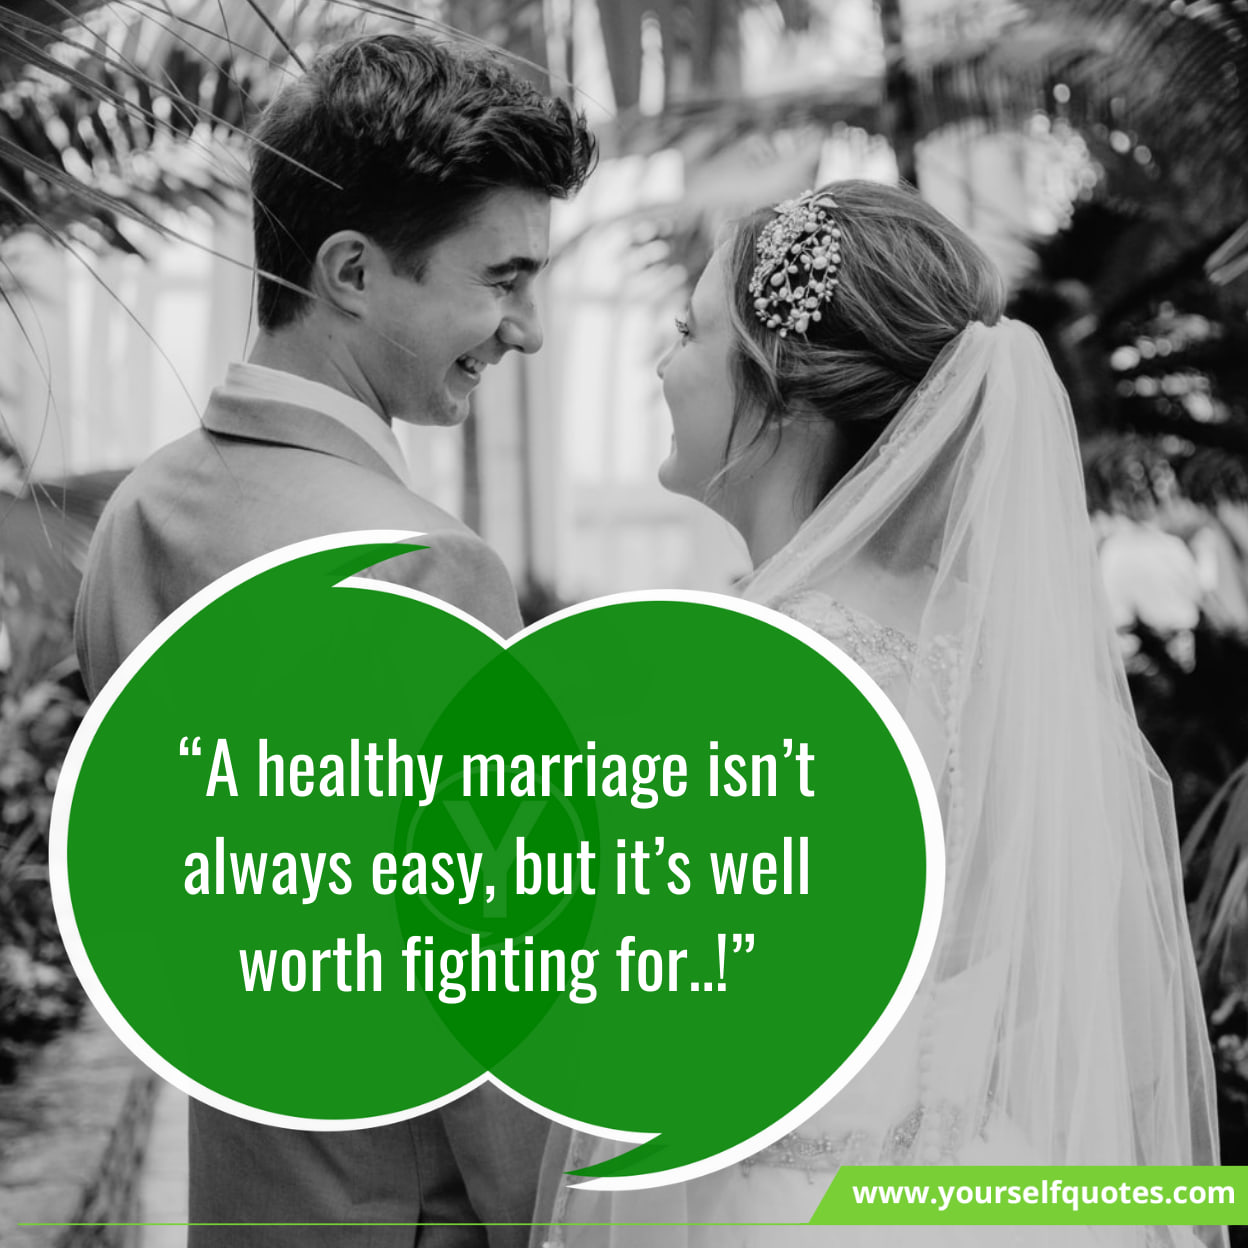 Inspiring Quotes On Marriage